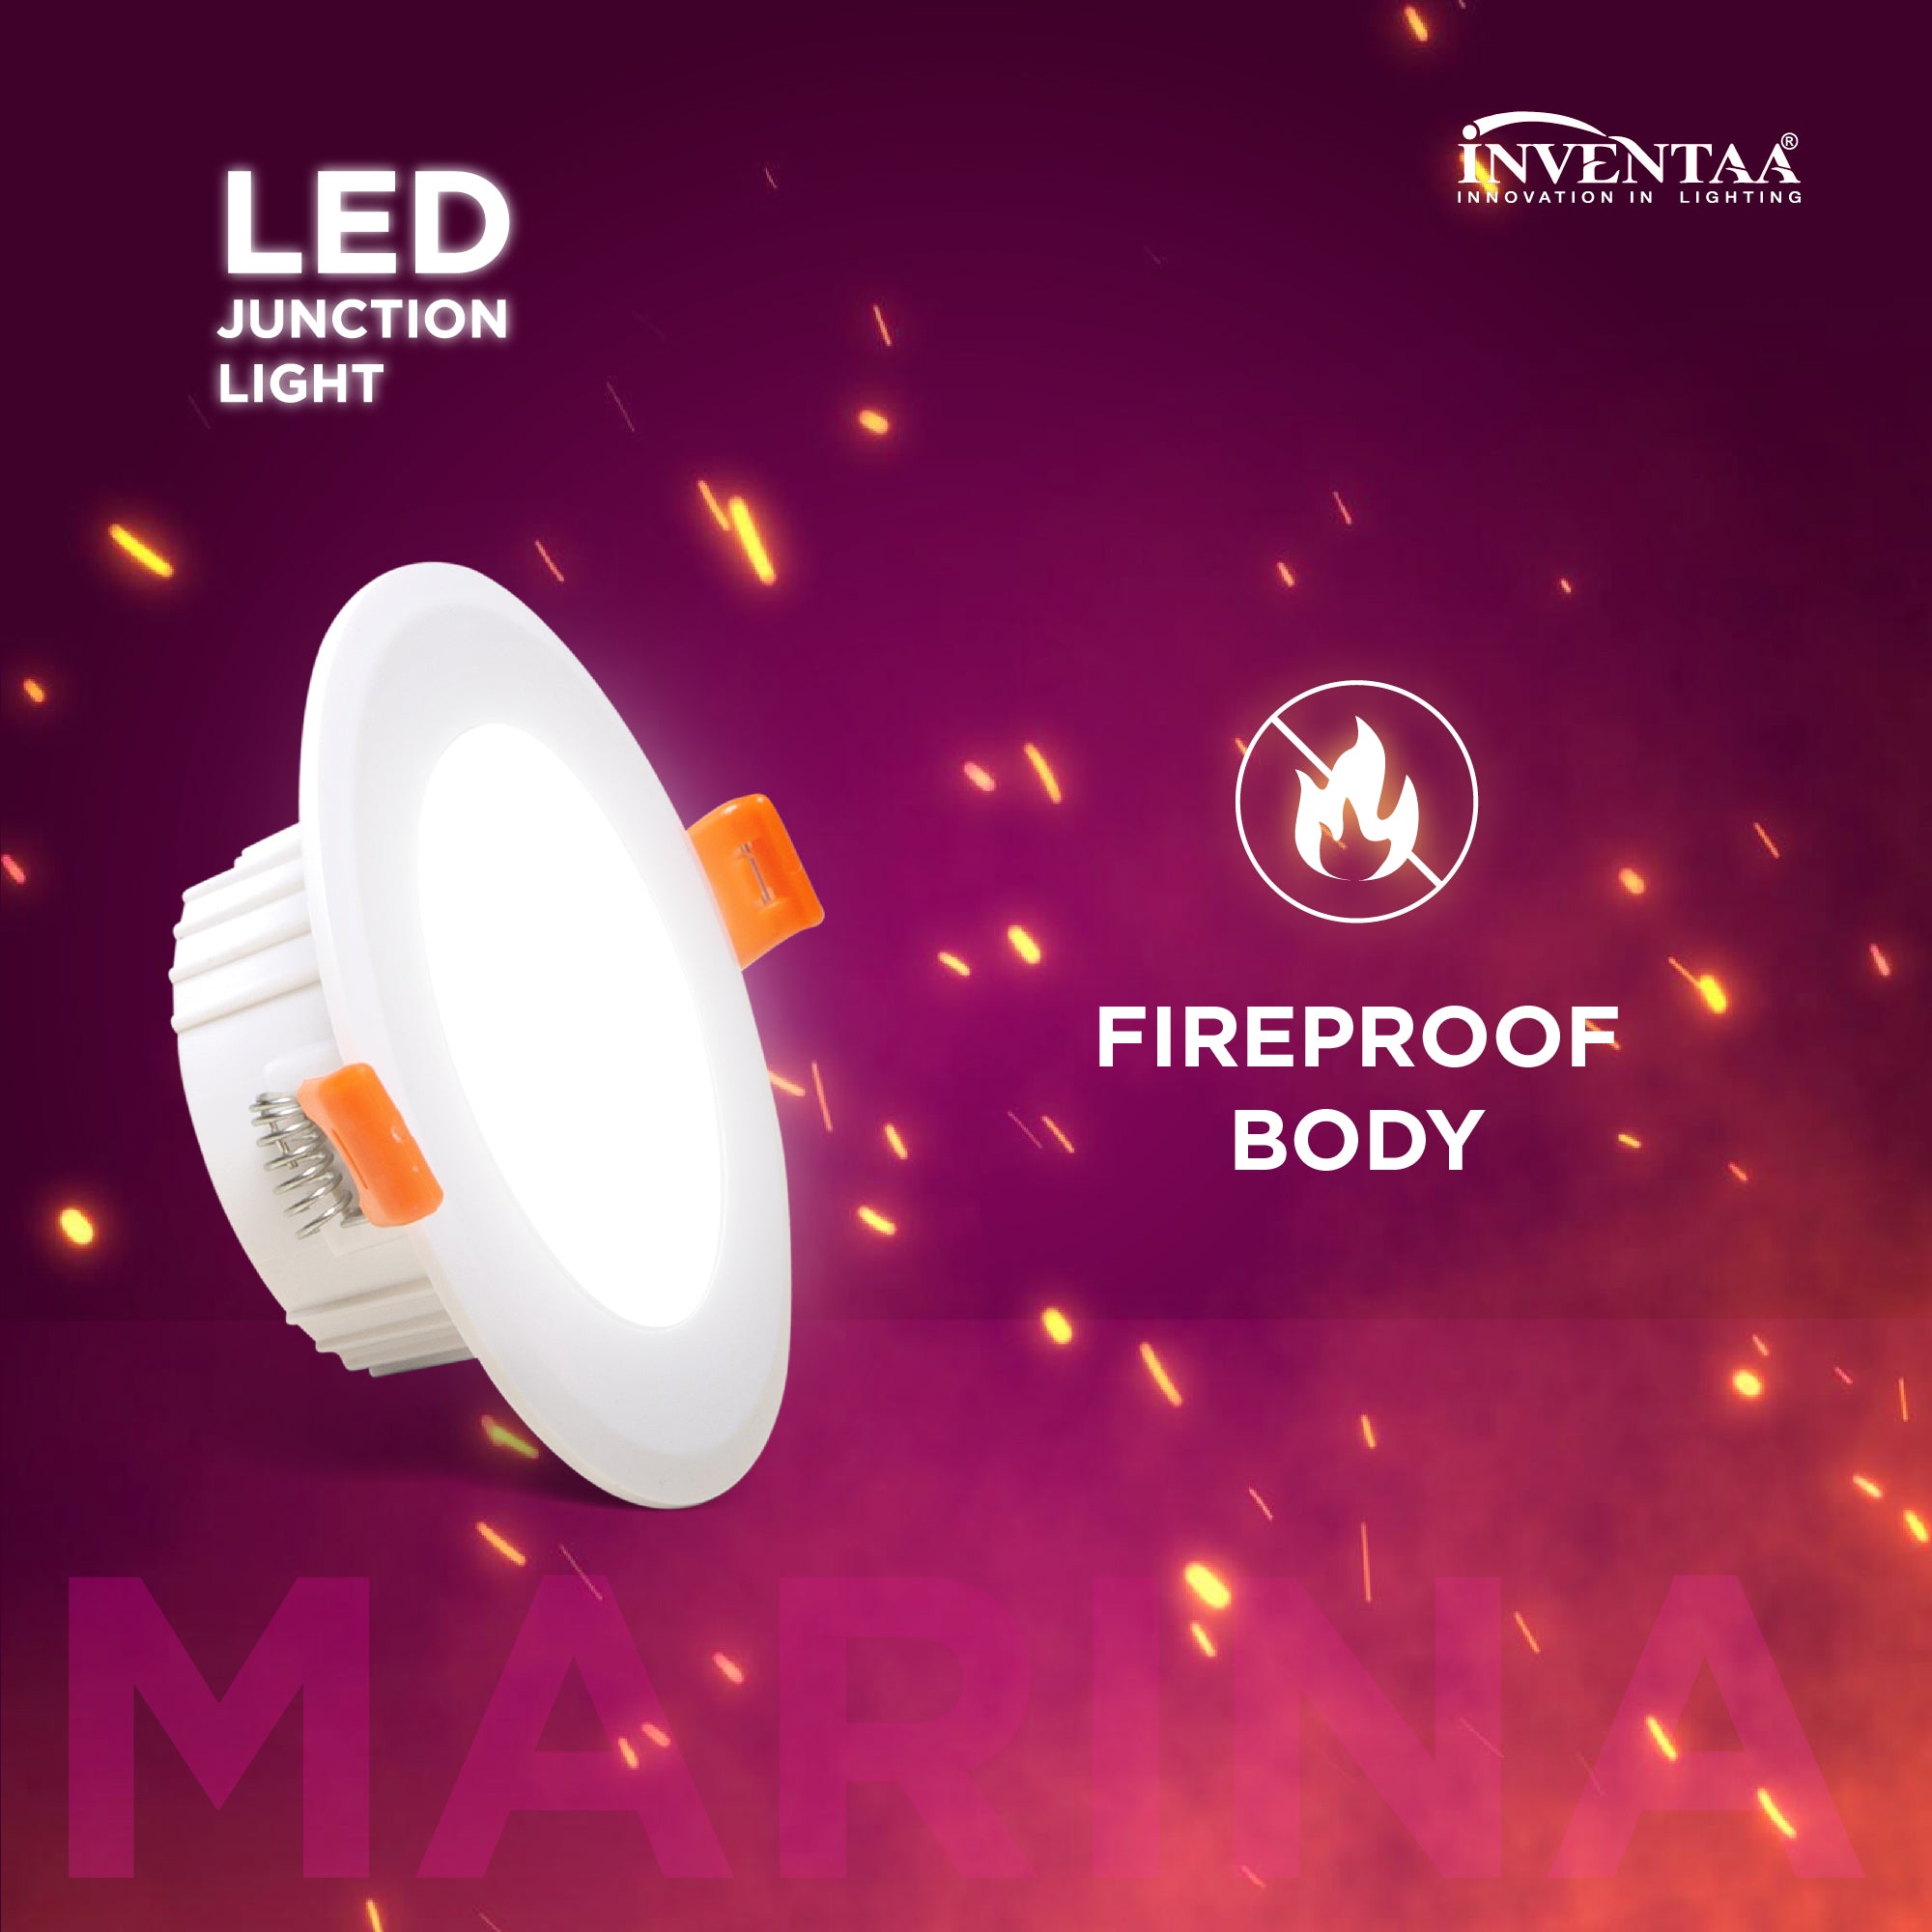 Marina 5W LED Junction Light Featuring Its Fiireproof Resistance #Suitable For_2 inch Deep Junction Box